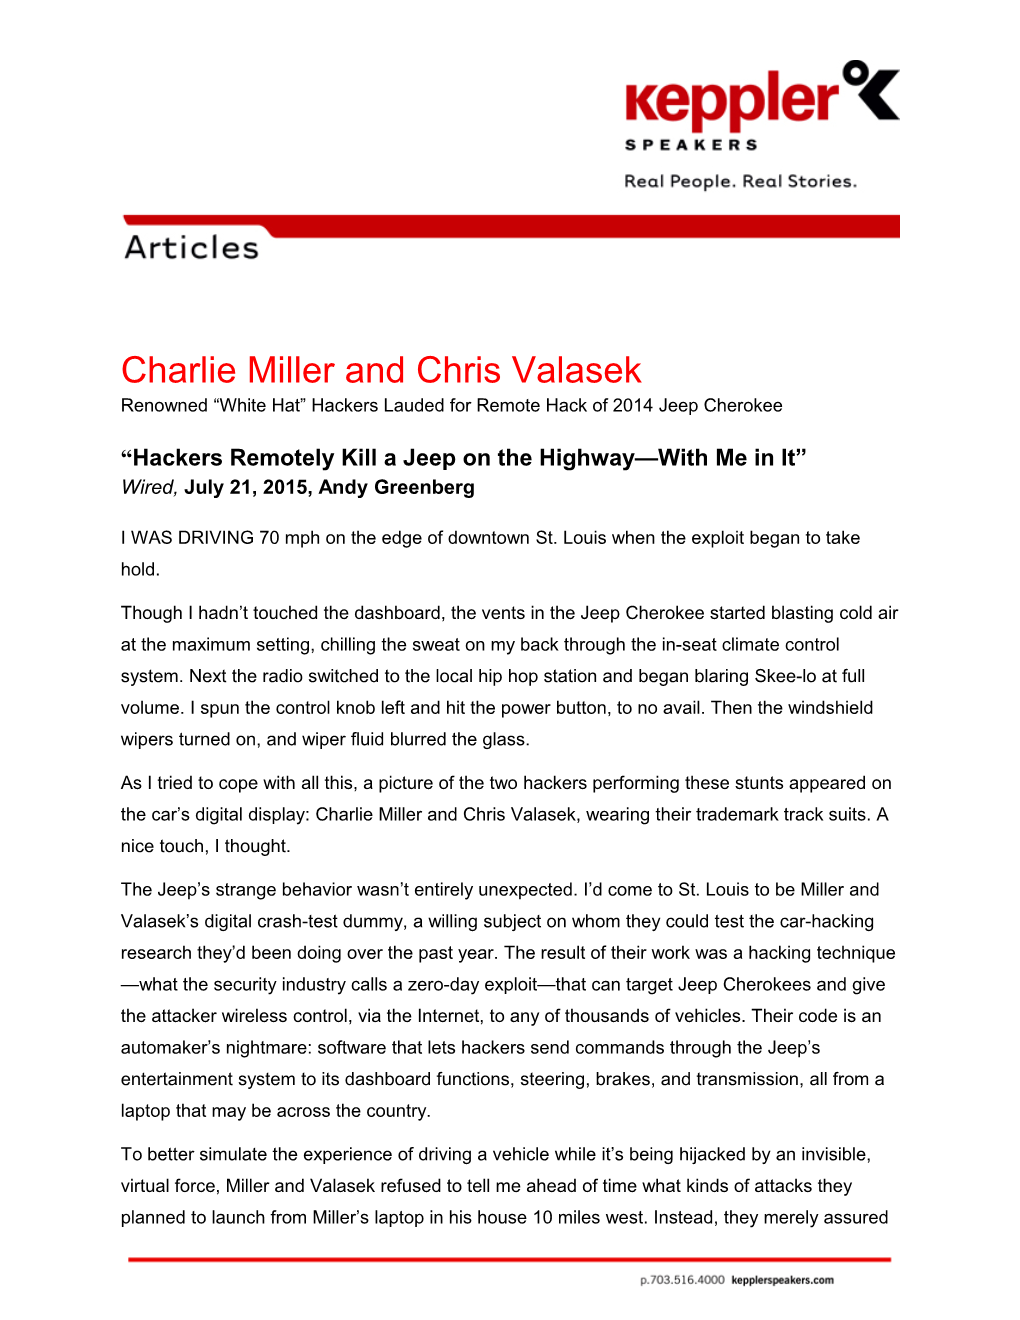 Charlie Miller and Chris Valasek Renowned White Hat Hackers Lauded for Remote Hack Of